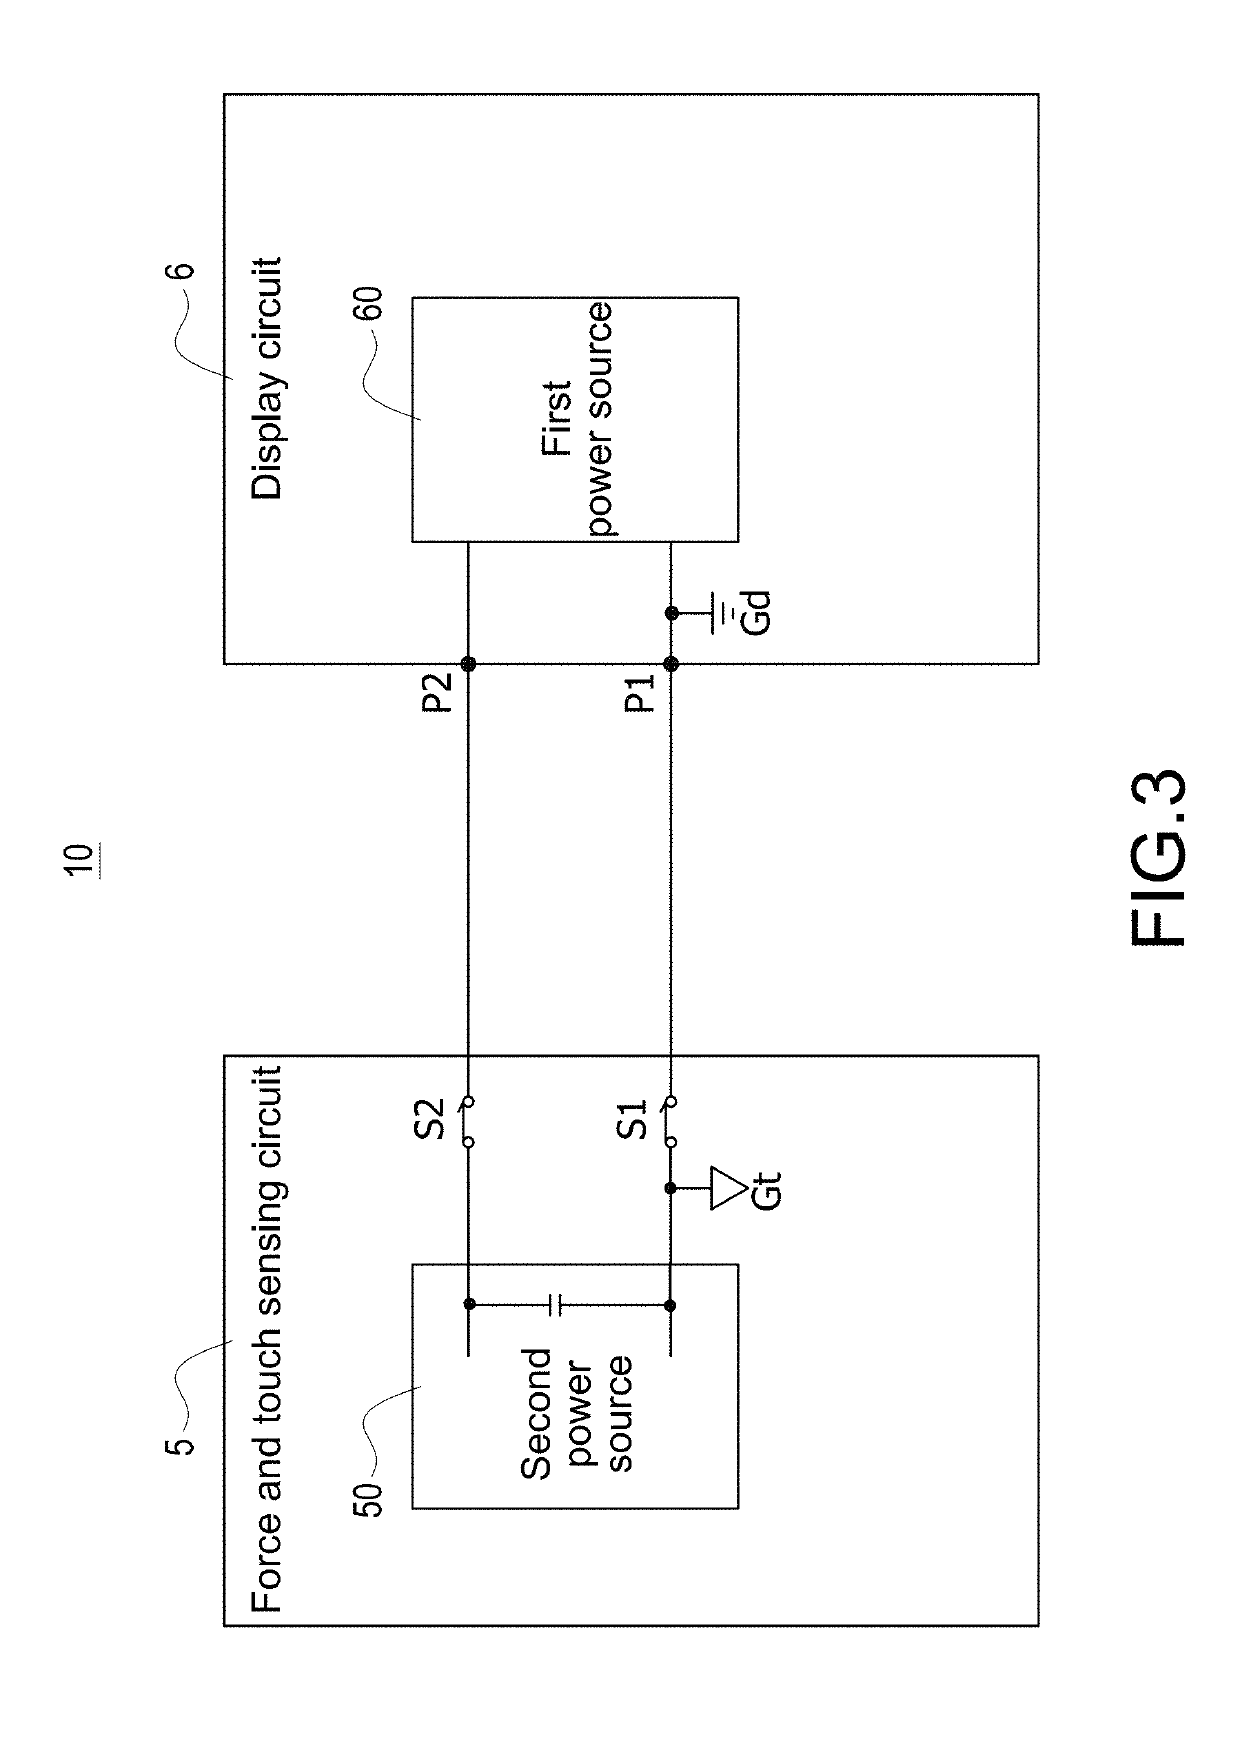 Method for operating electronic apparatus with independent power sources